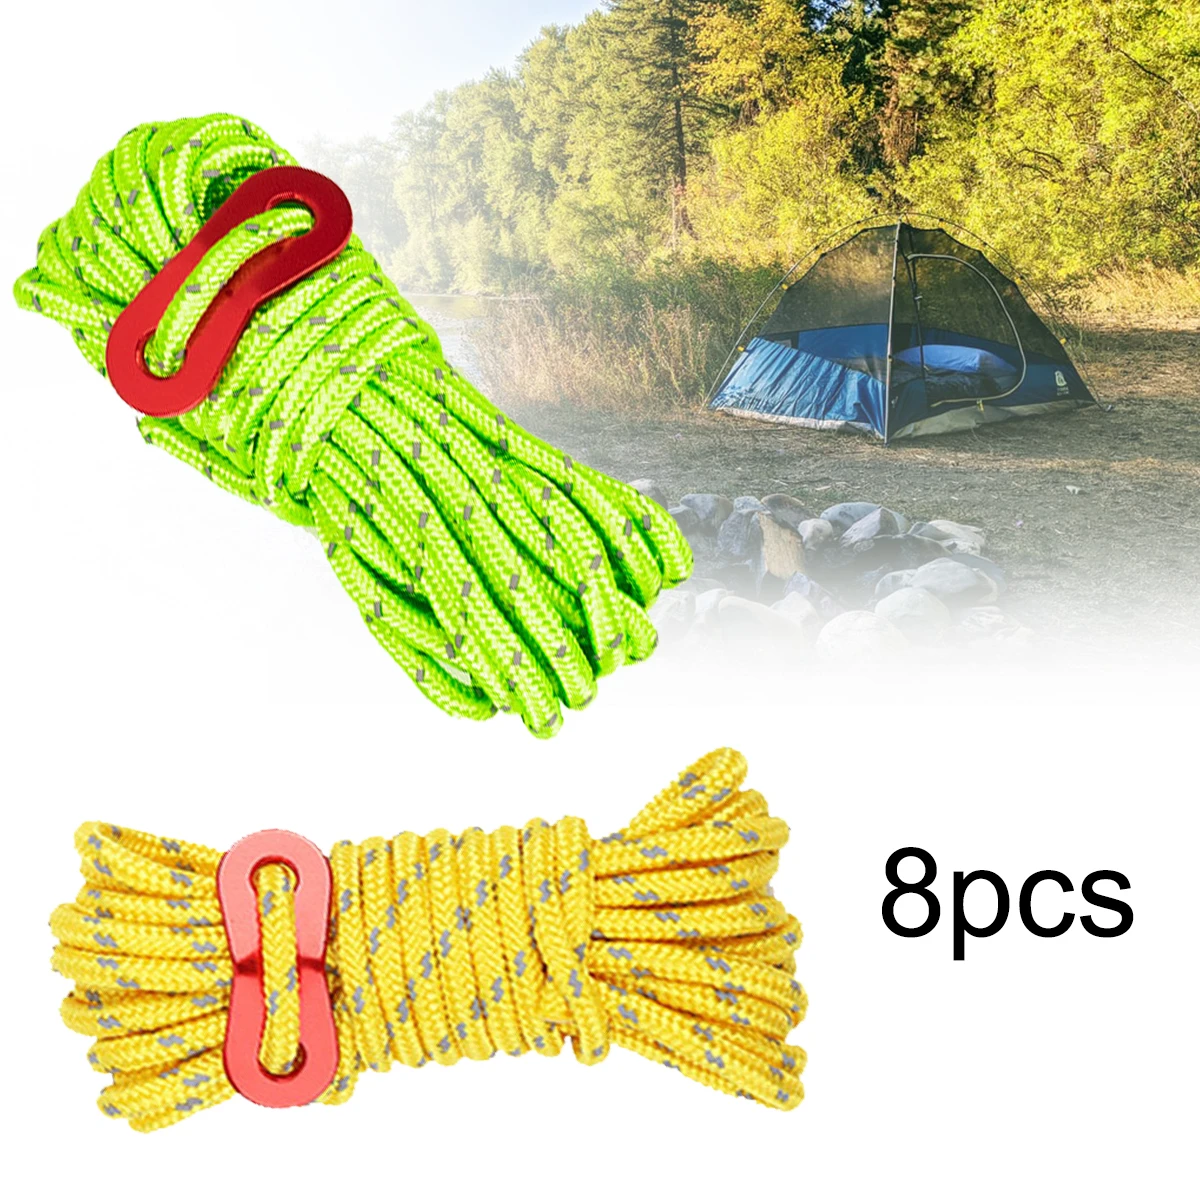 

8pcs Outdoor Tent Rope 4mm Bold Reflective Windproof Rope Canopy Pull Rope Tied Fixed Clothesline With Aluminum Alloy Buckle